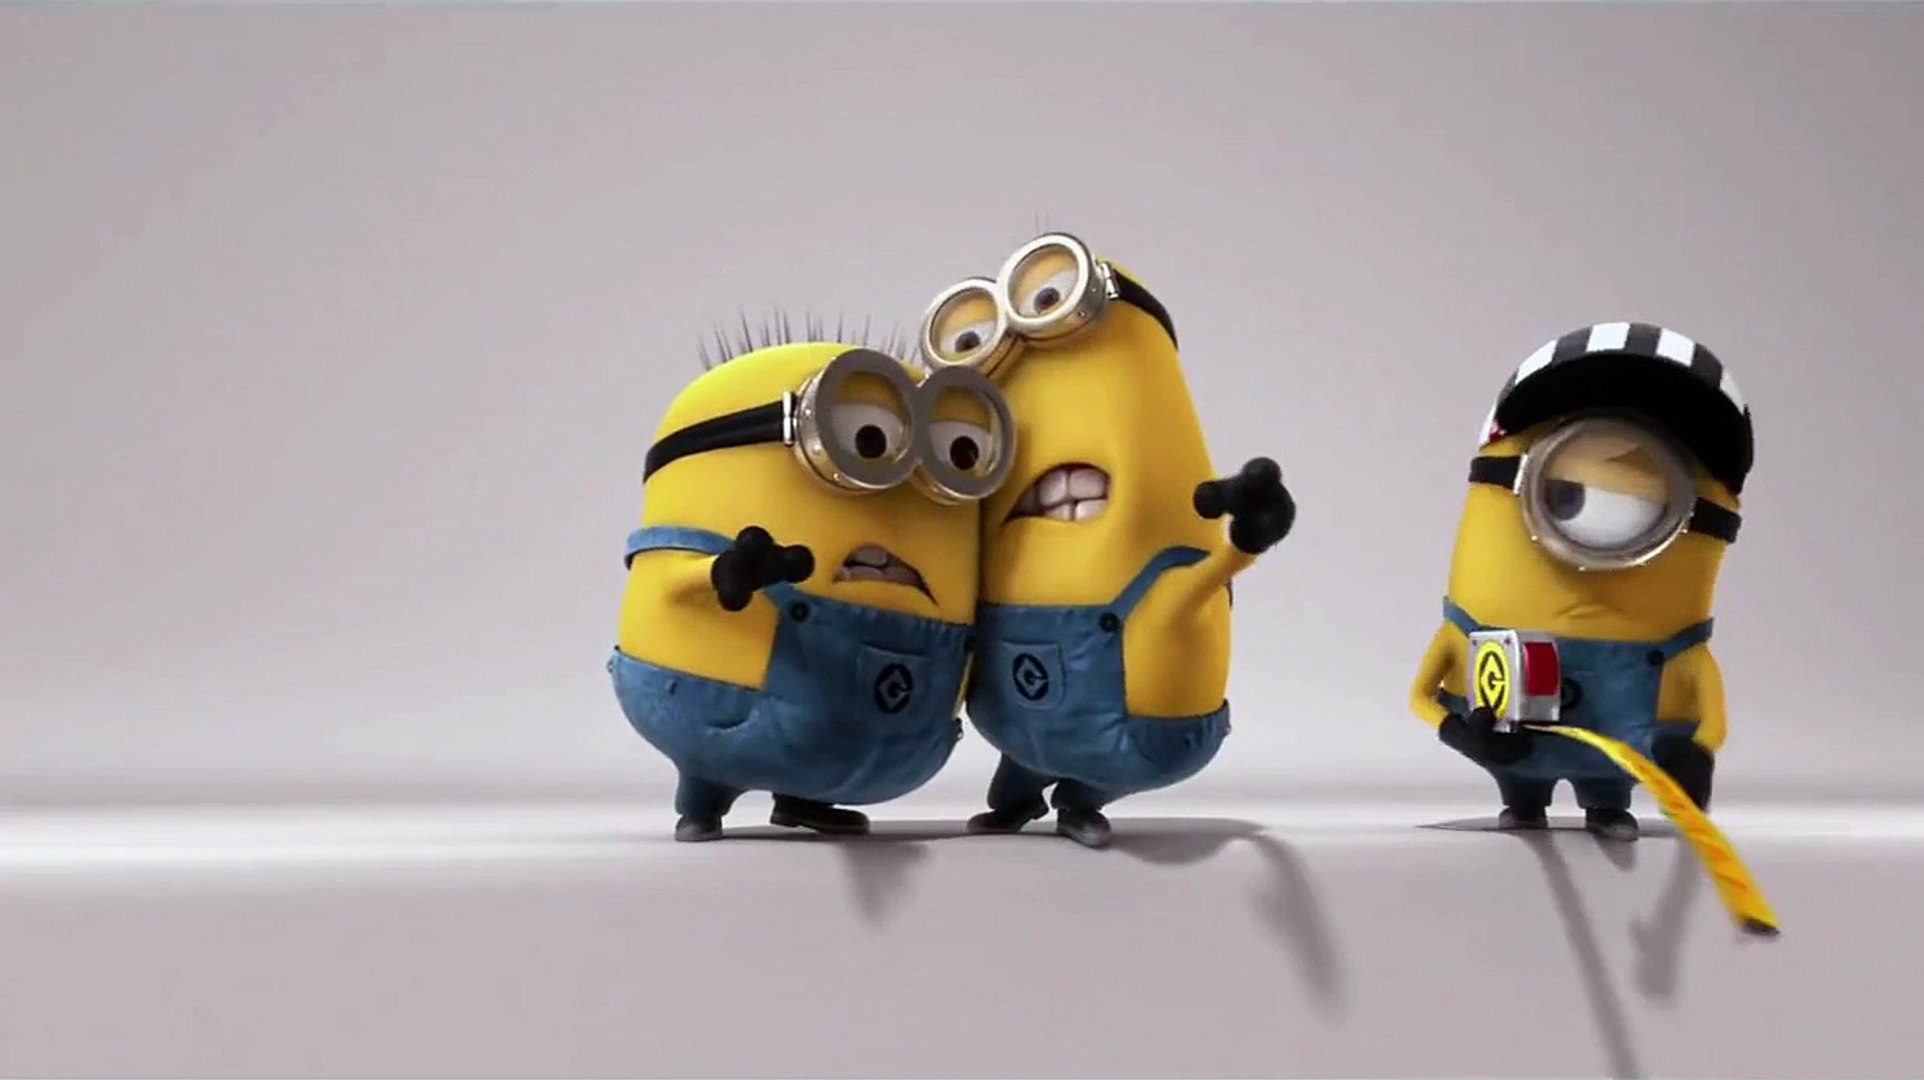 Minions are awesome HD - Funny video - video Dailymotion